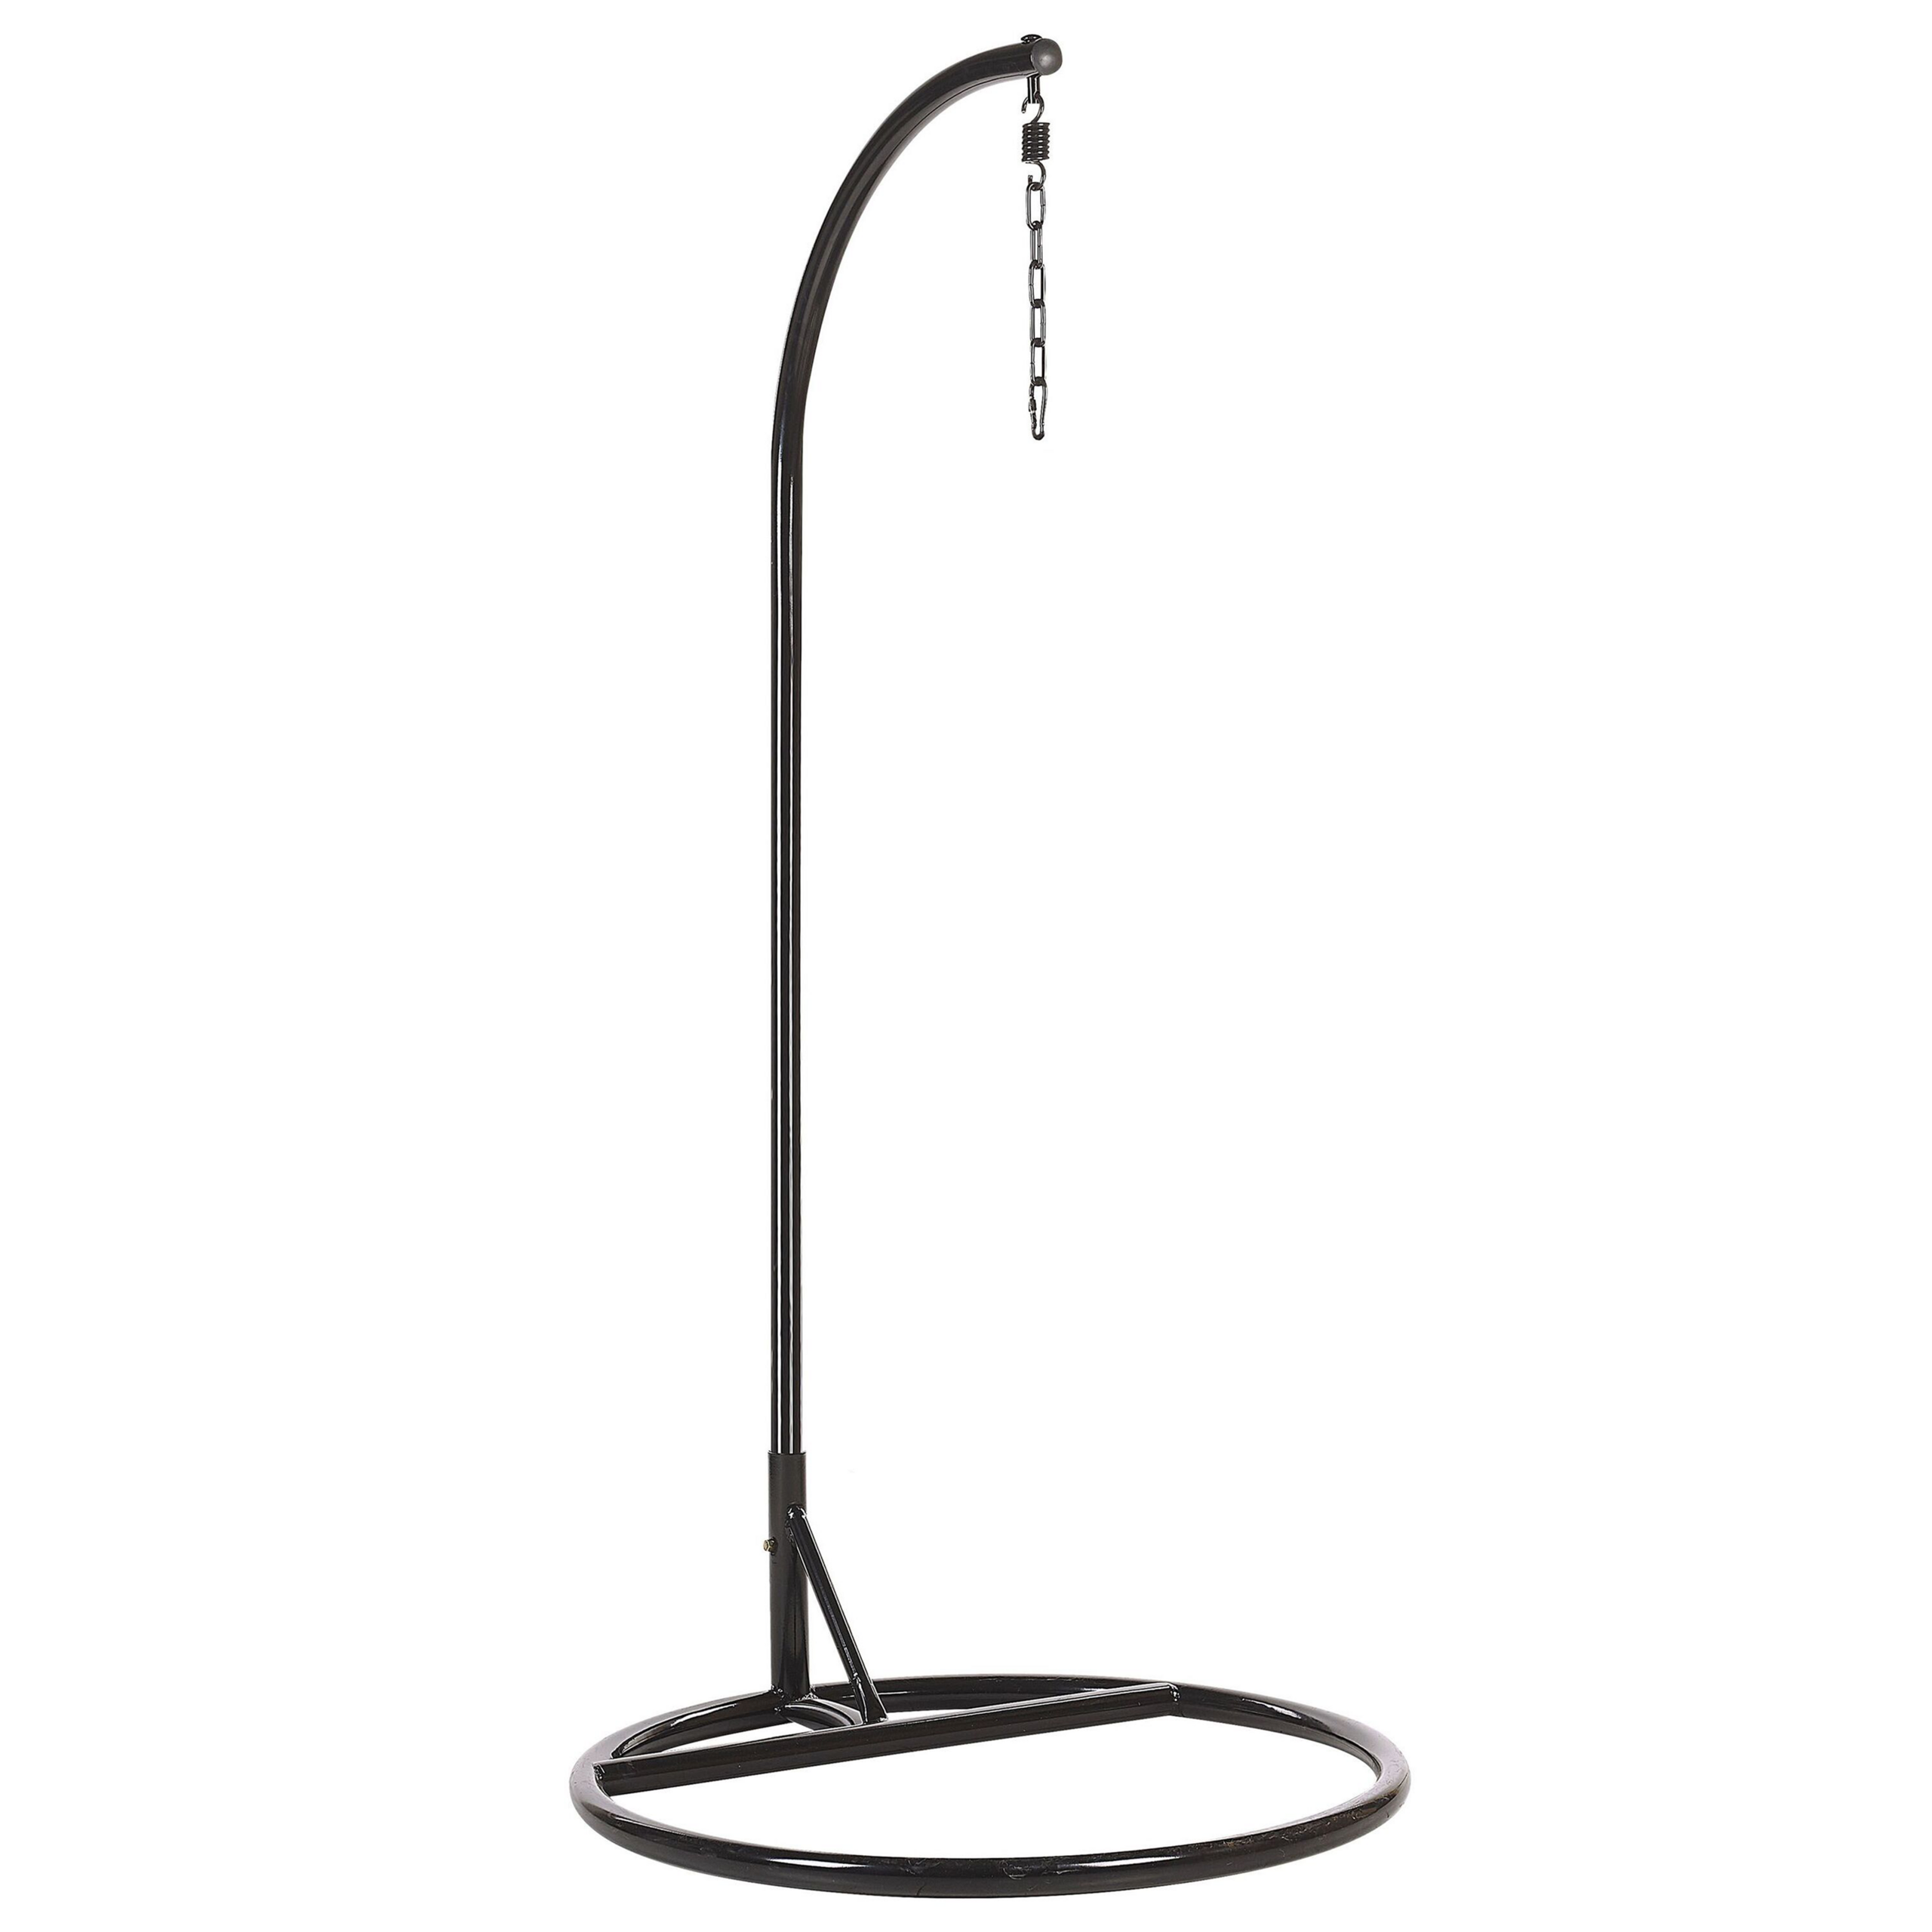 Beliani Stand for Hanging Chair Black Powder-Coated Steel with Chain